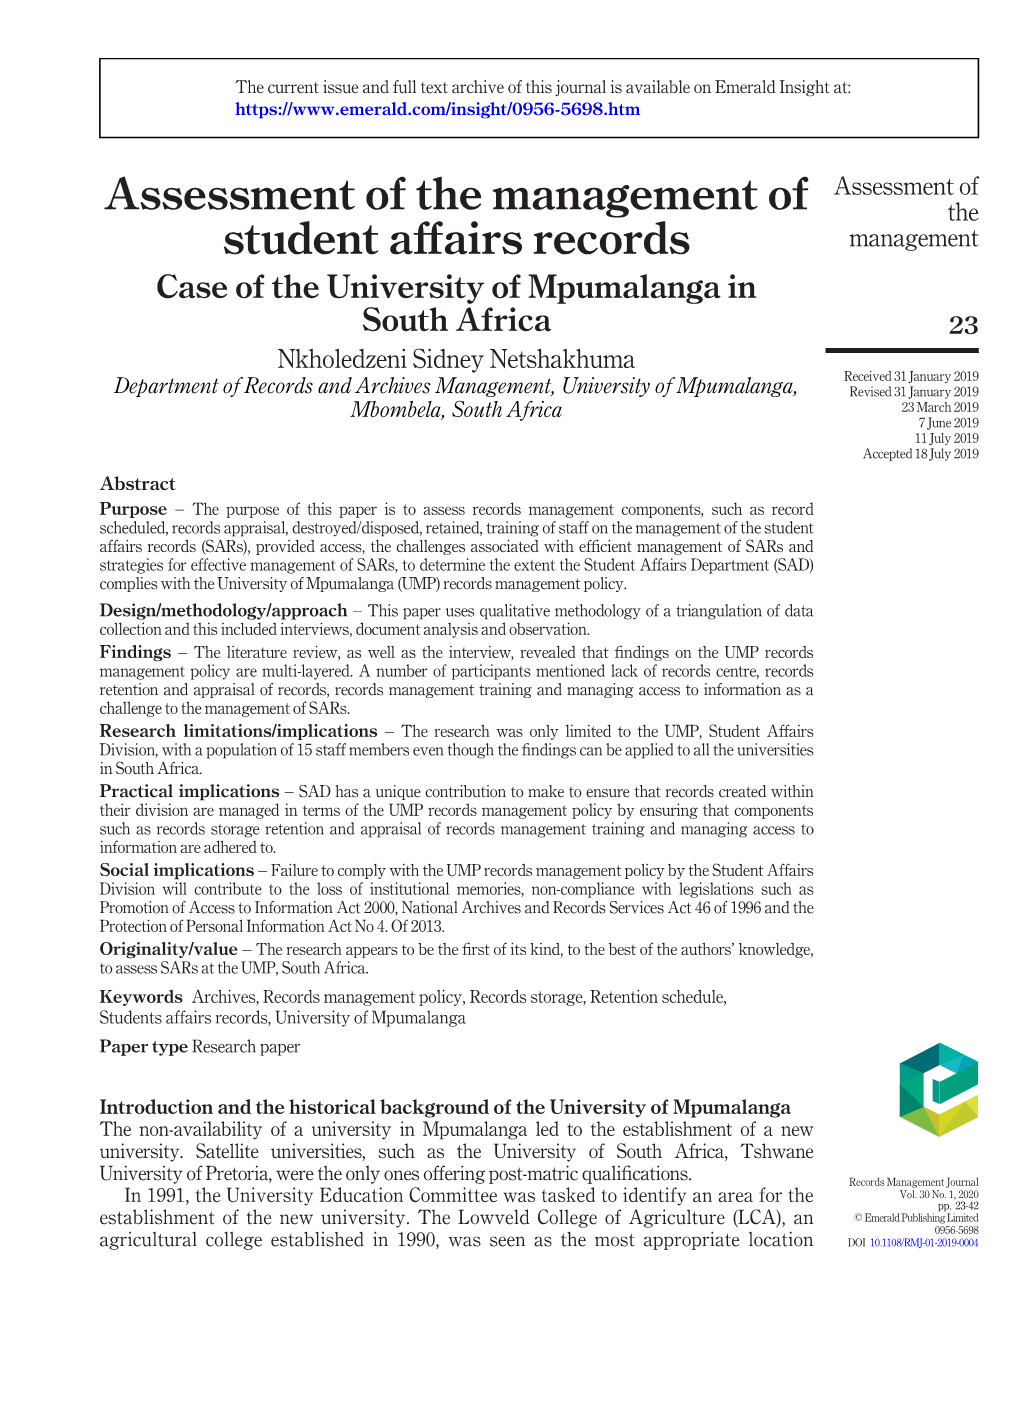 Assessment of the Management of Student Affairs Records